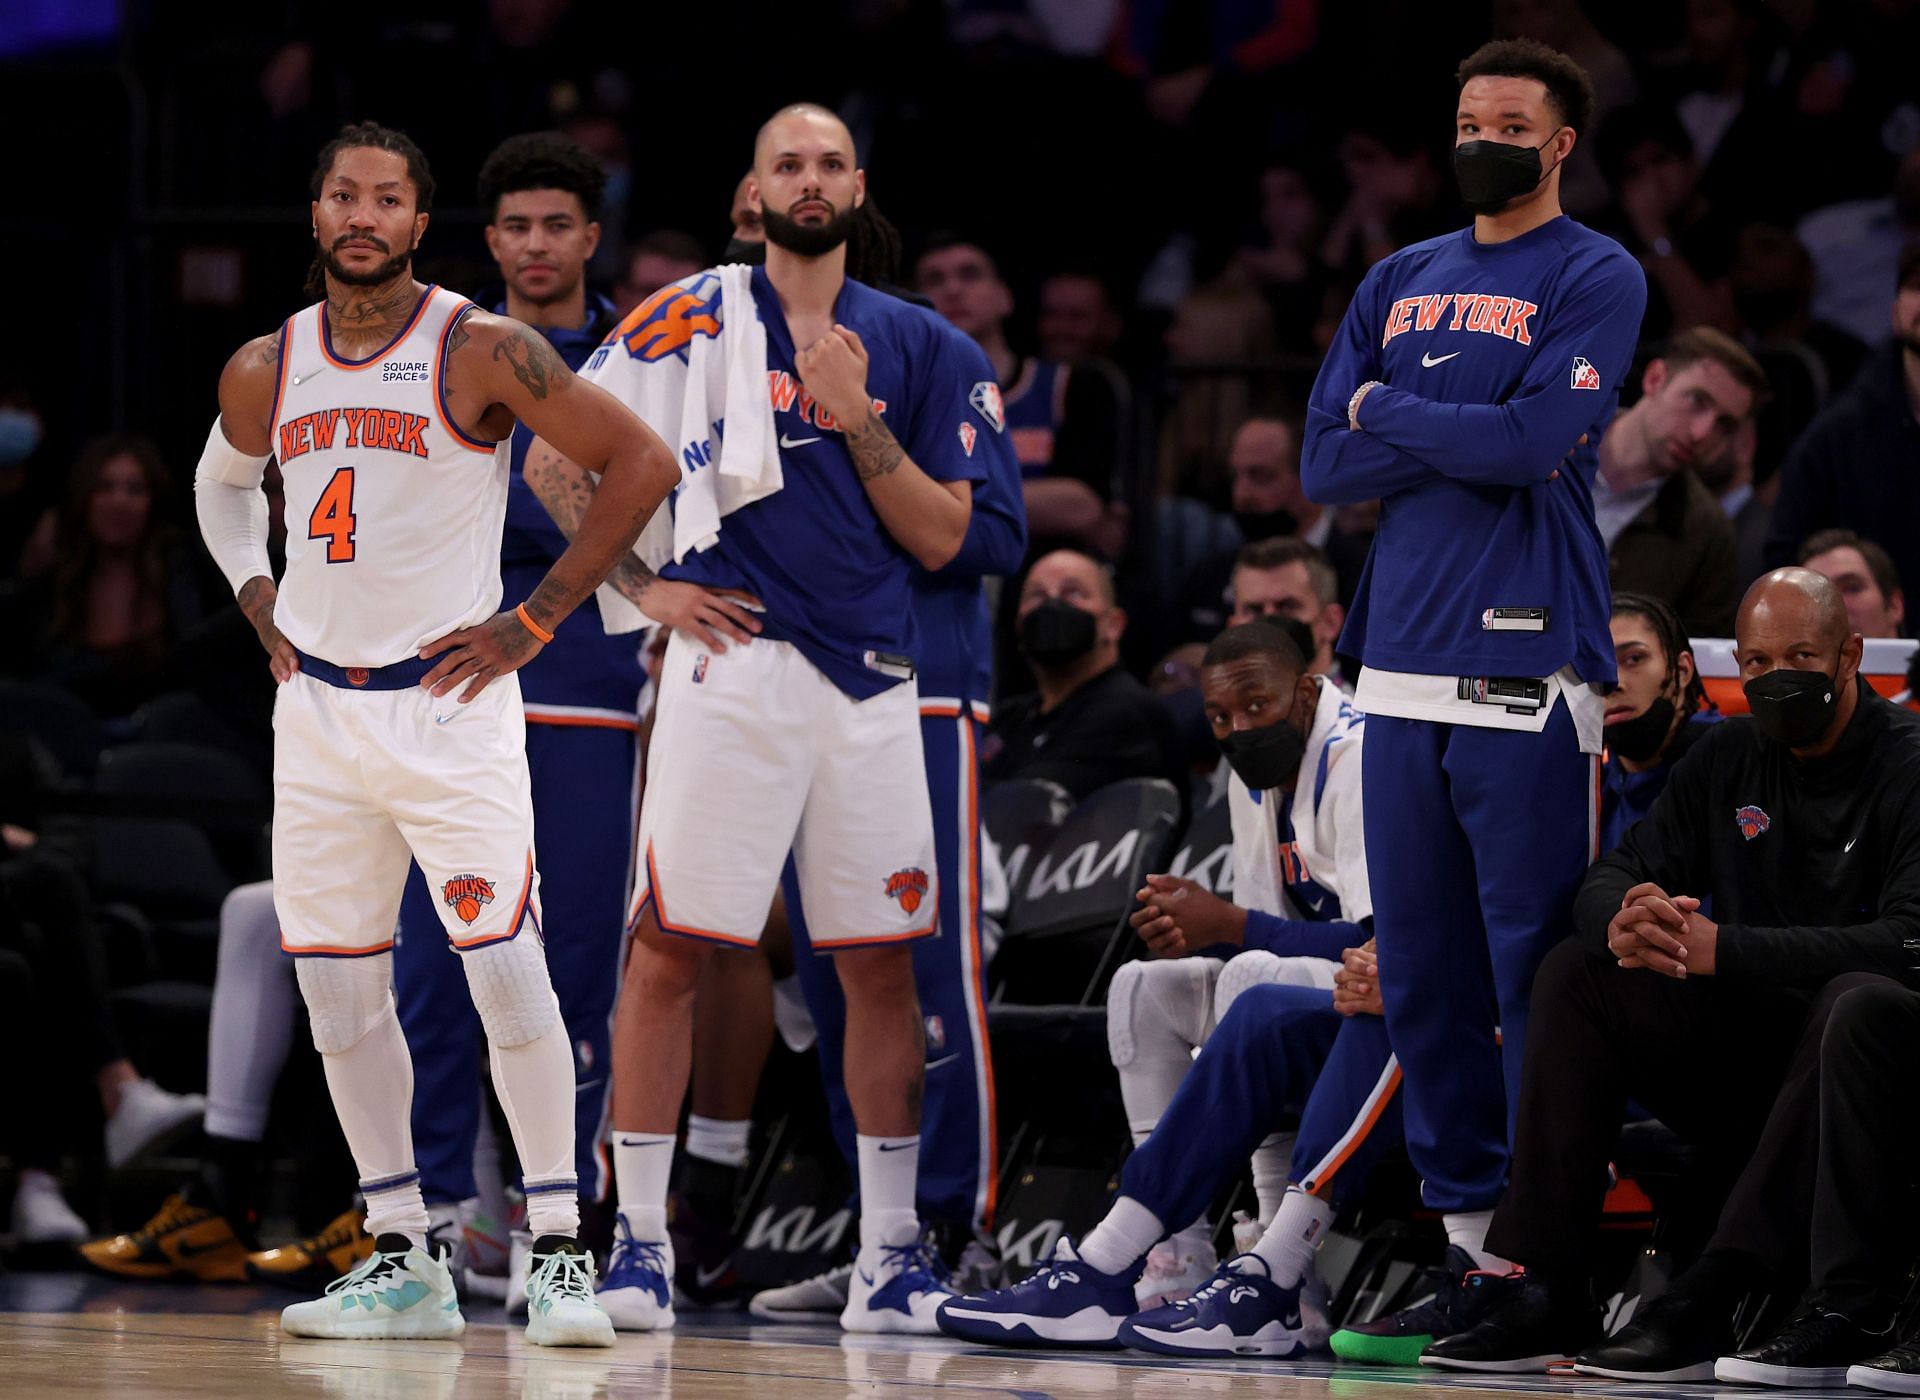 The New York Knicks&#039;s bench looks on at the game